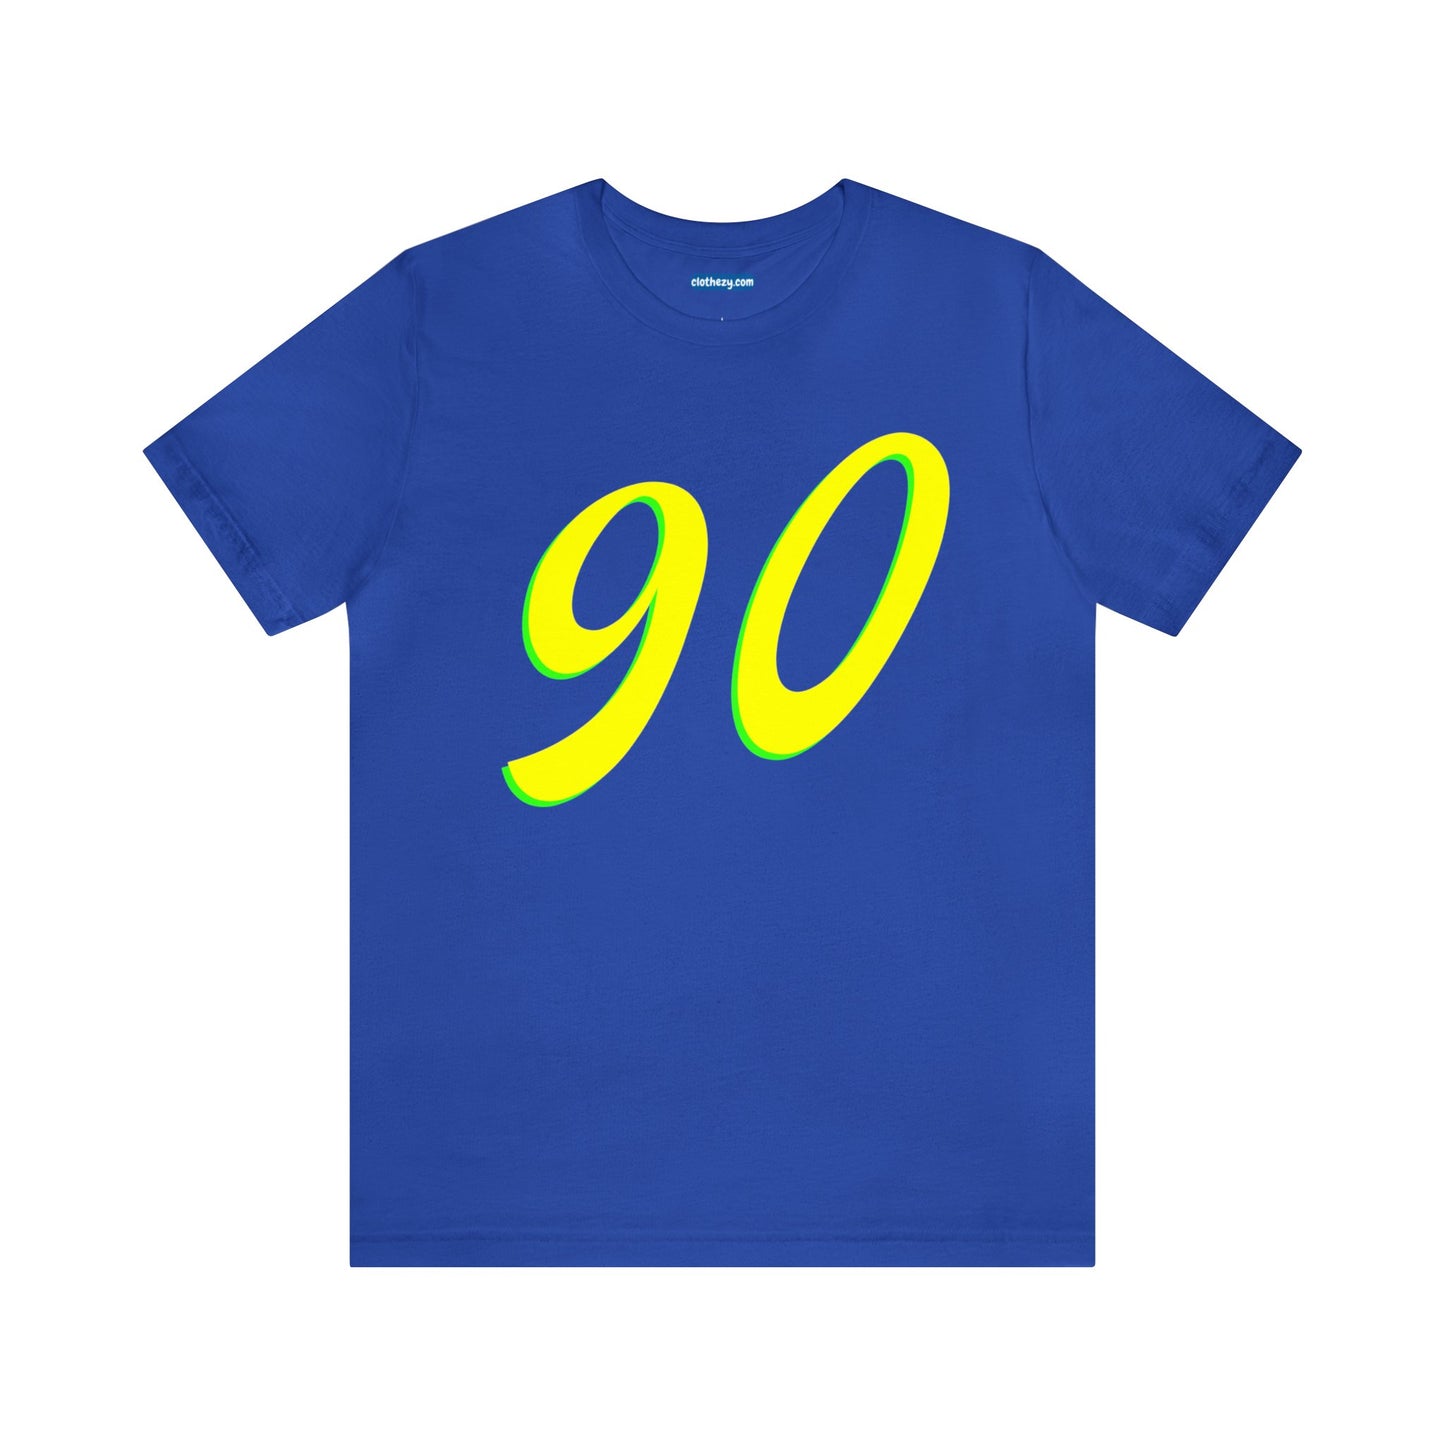 Number 90 Design - Soft Cotton Tee for birthdays and celebrations, Gift for friends and family, Multiple Options by clothezy.com in Royal Blue Size Small - Buy Now